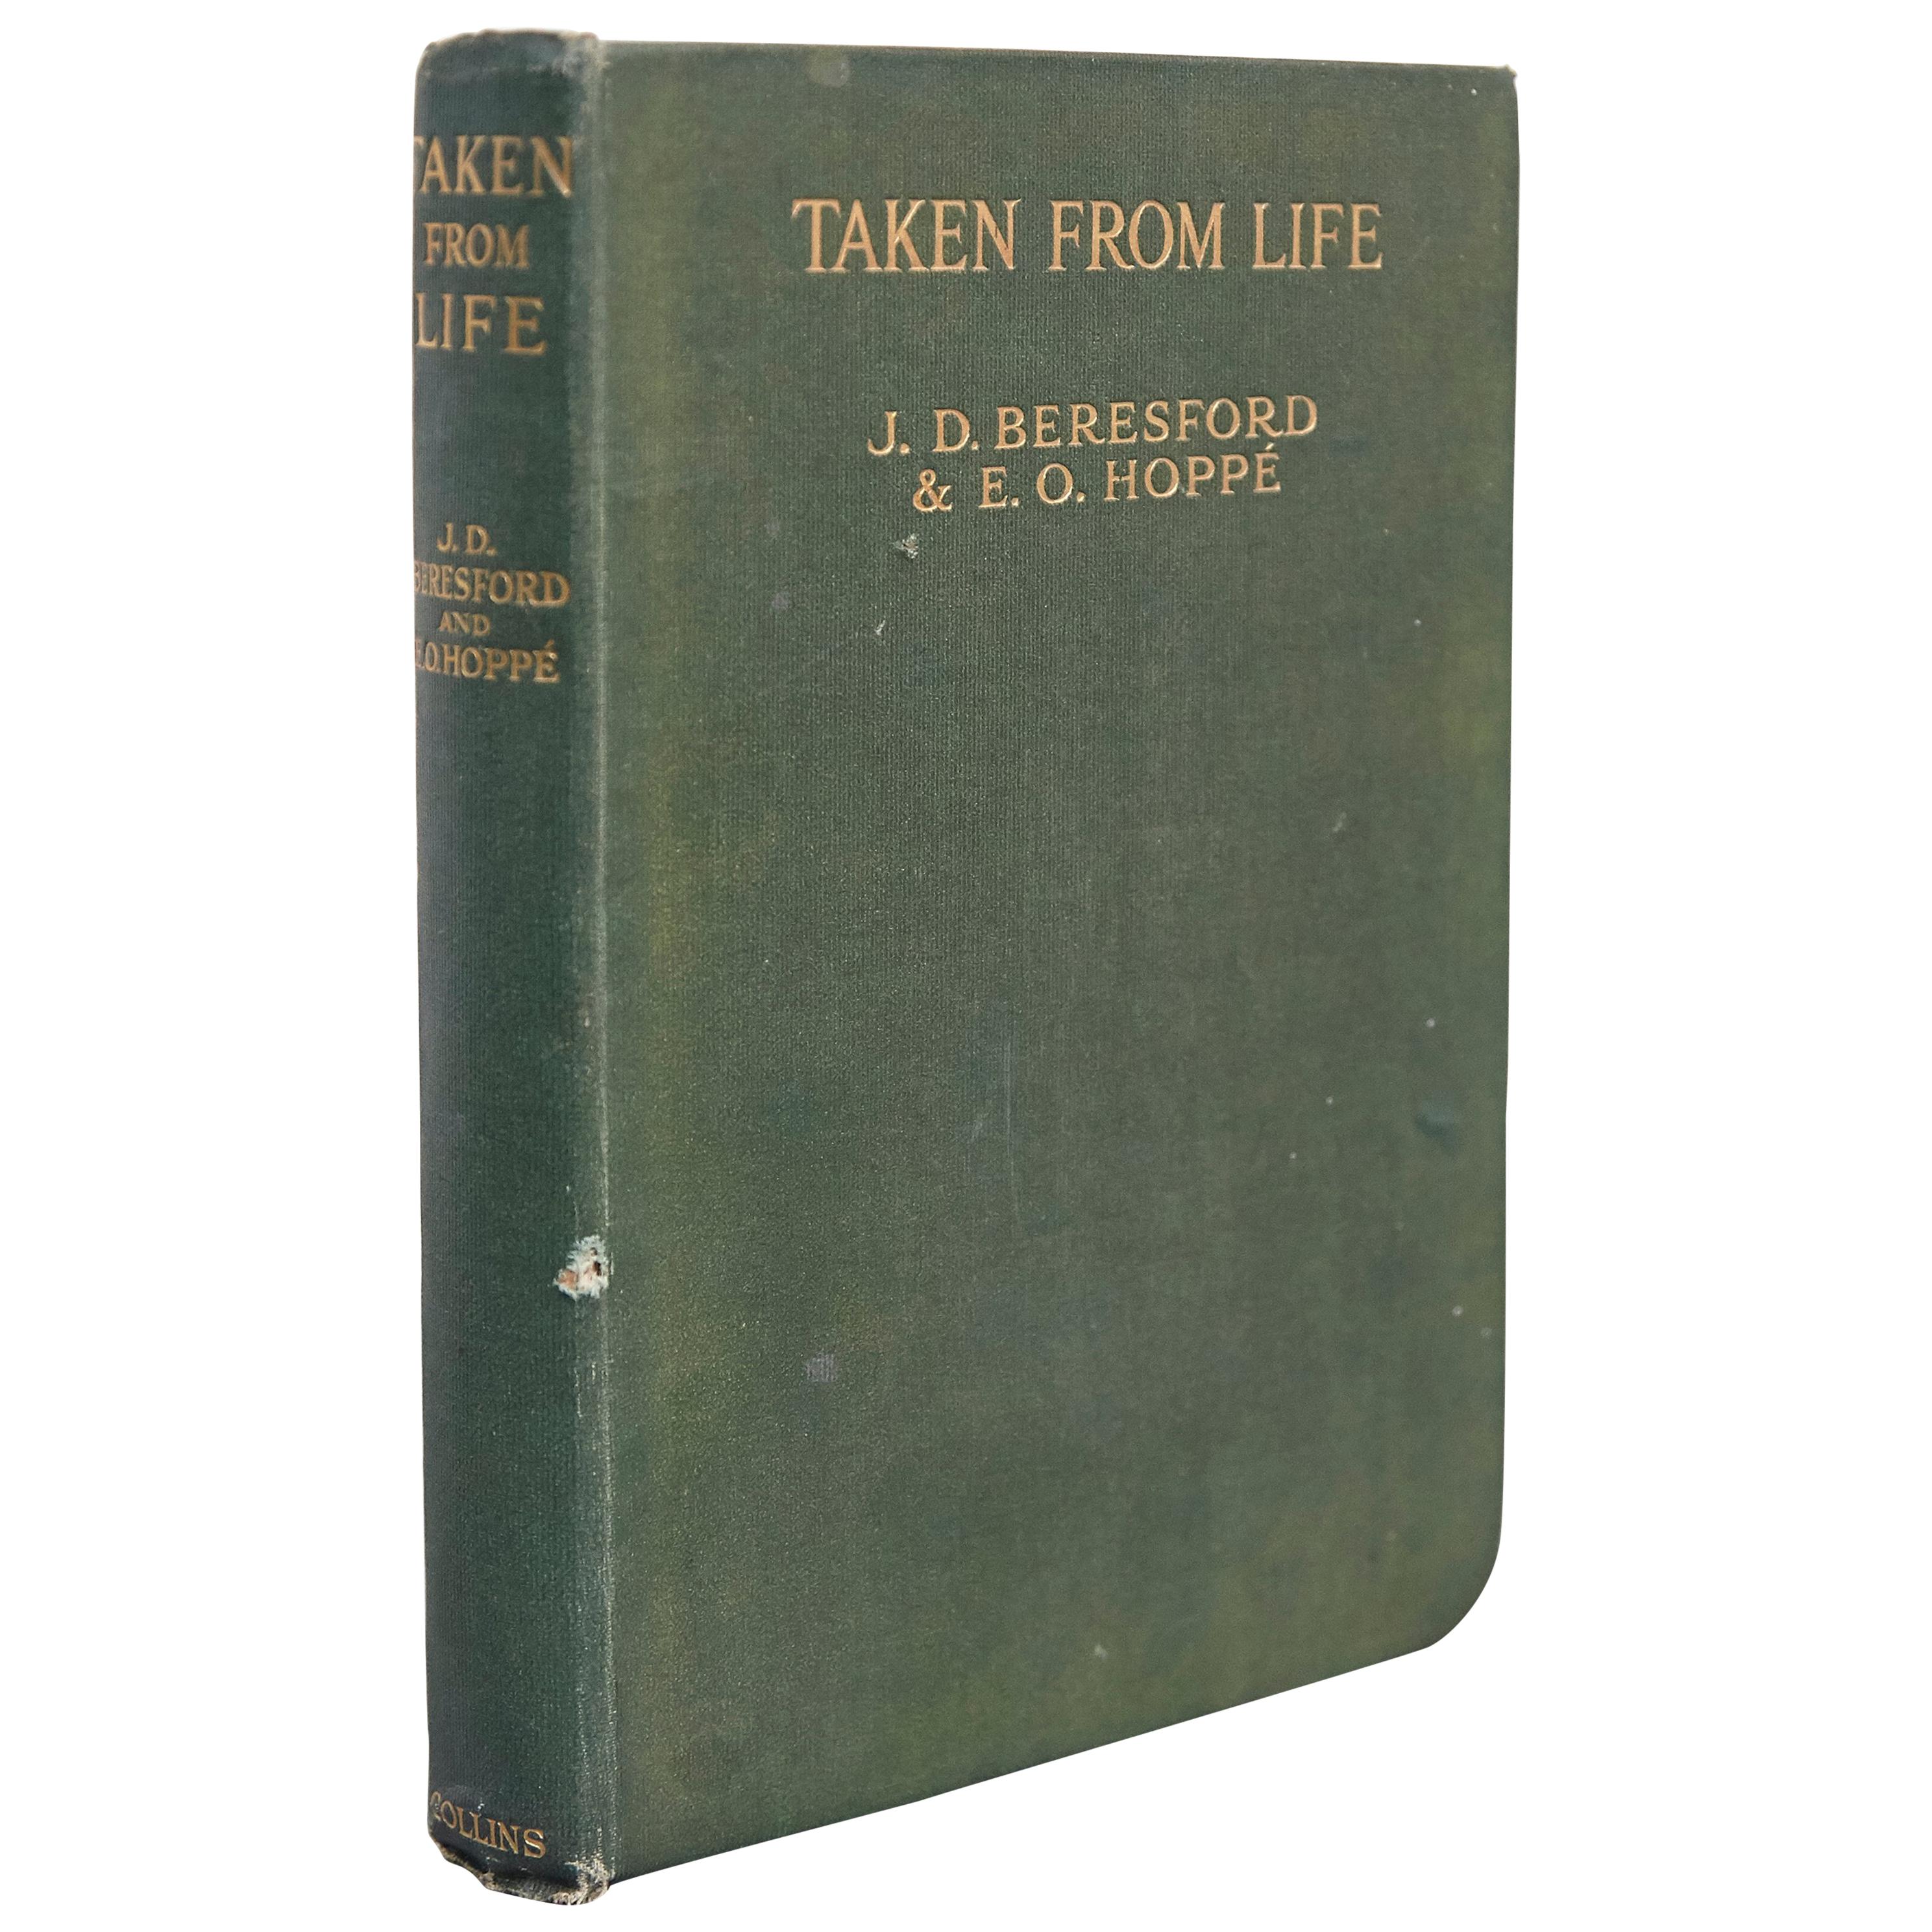 Taken from Life by J. D. Beresford & E. O. Hoppe 1922 1st Edition